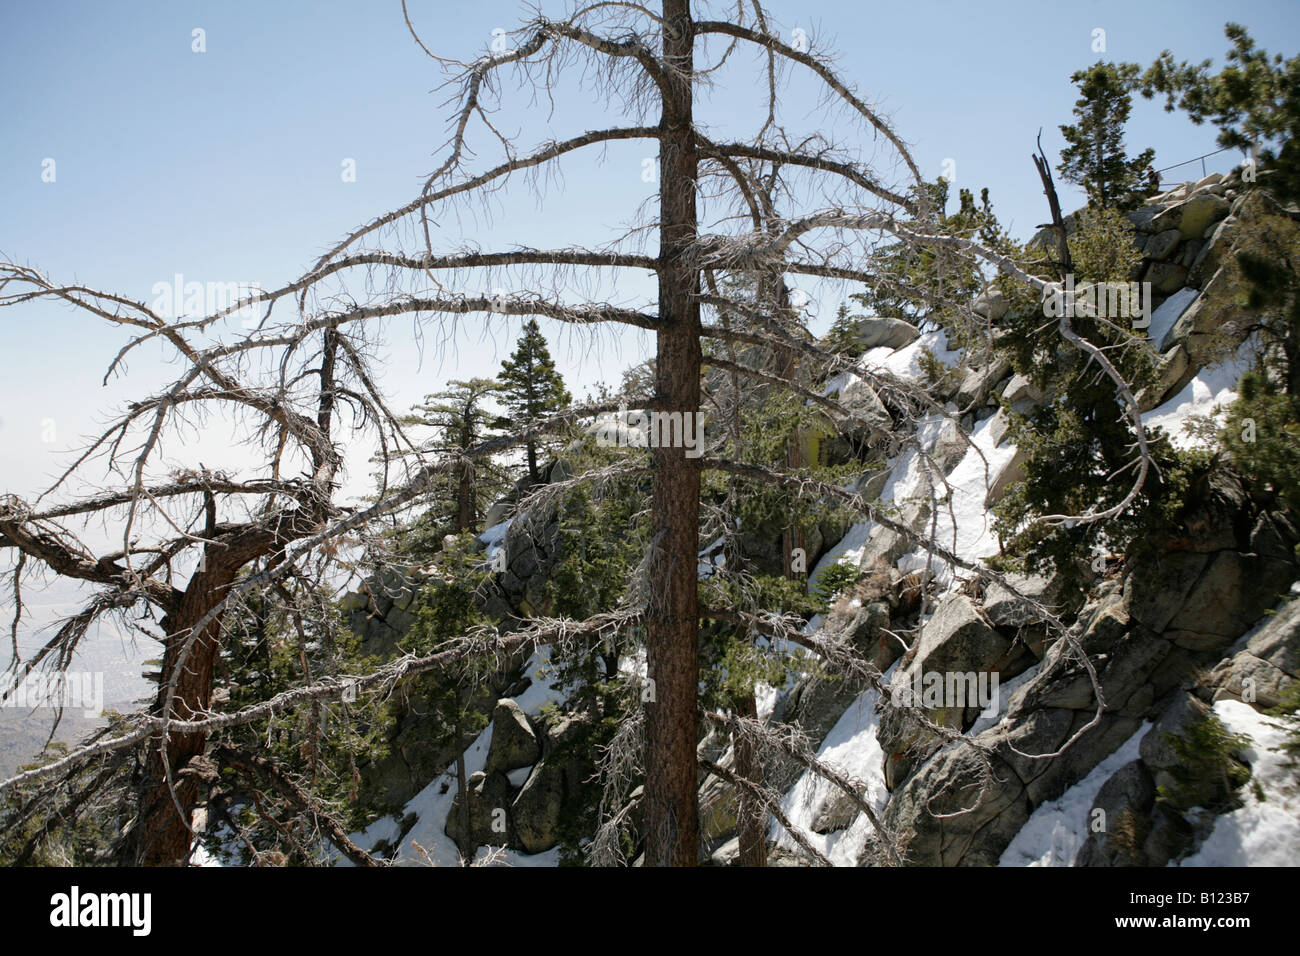 Mount San Jacinto State Park, at the top of the Palm Springs Aerial Tramway, California USA. Stock Photo